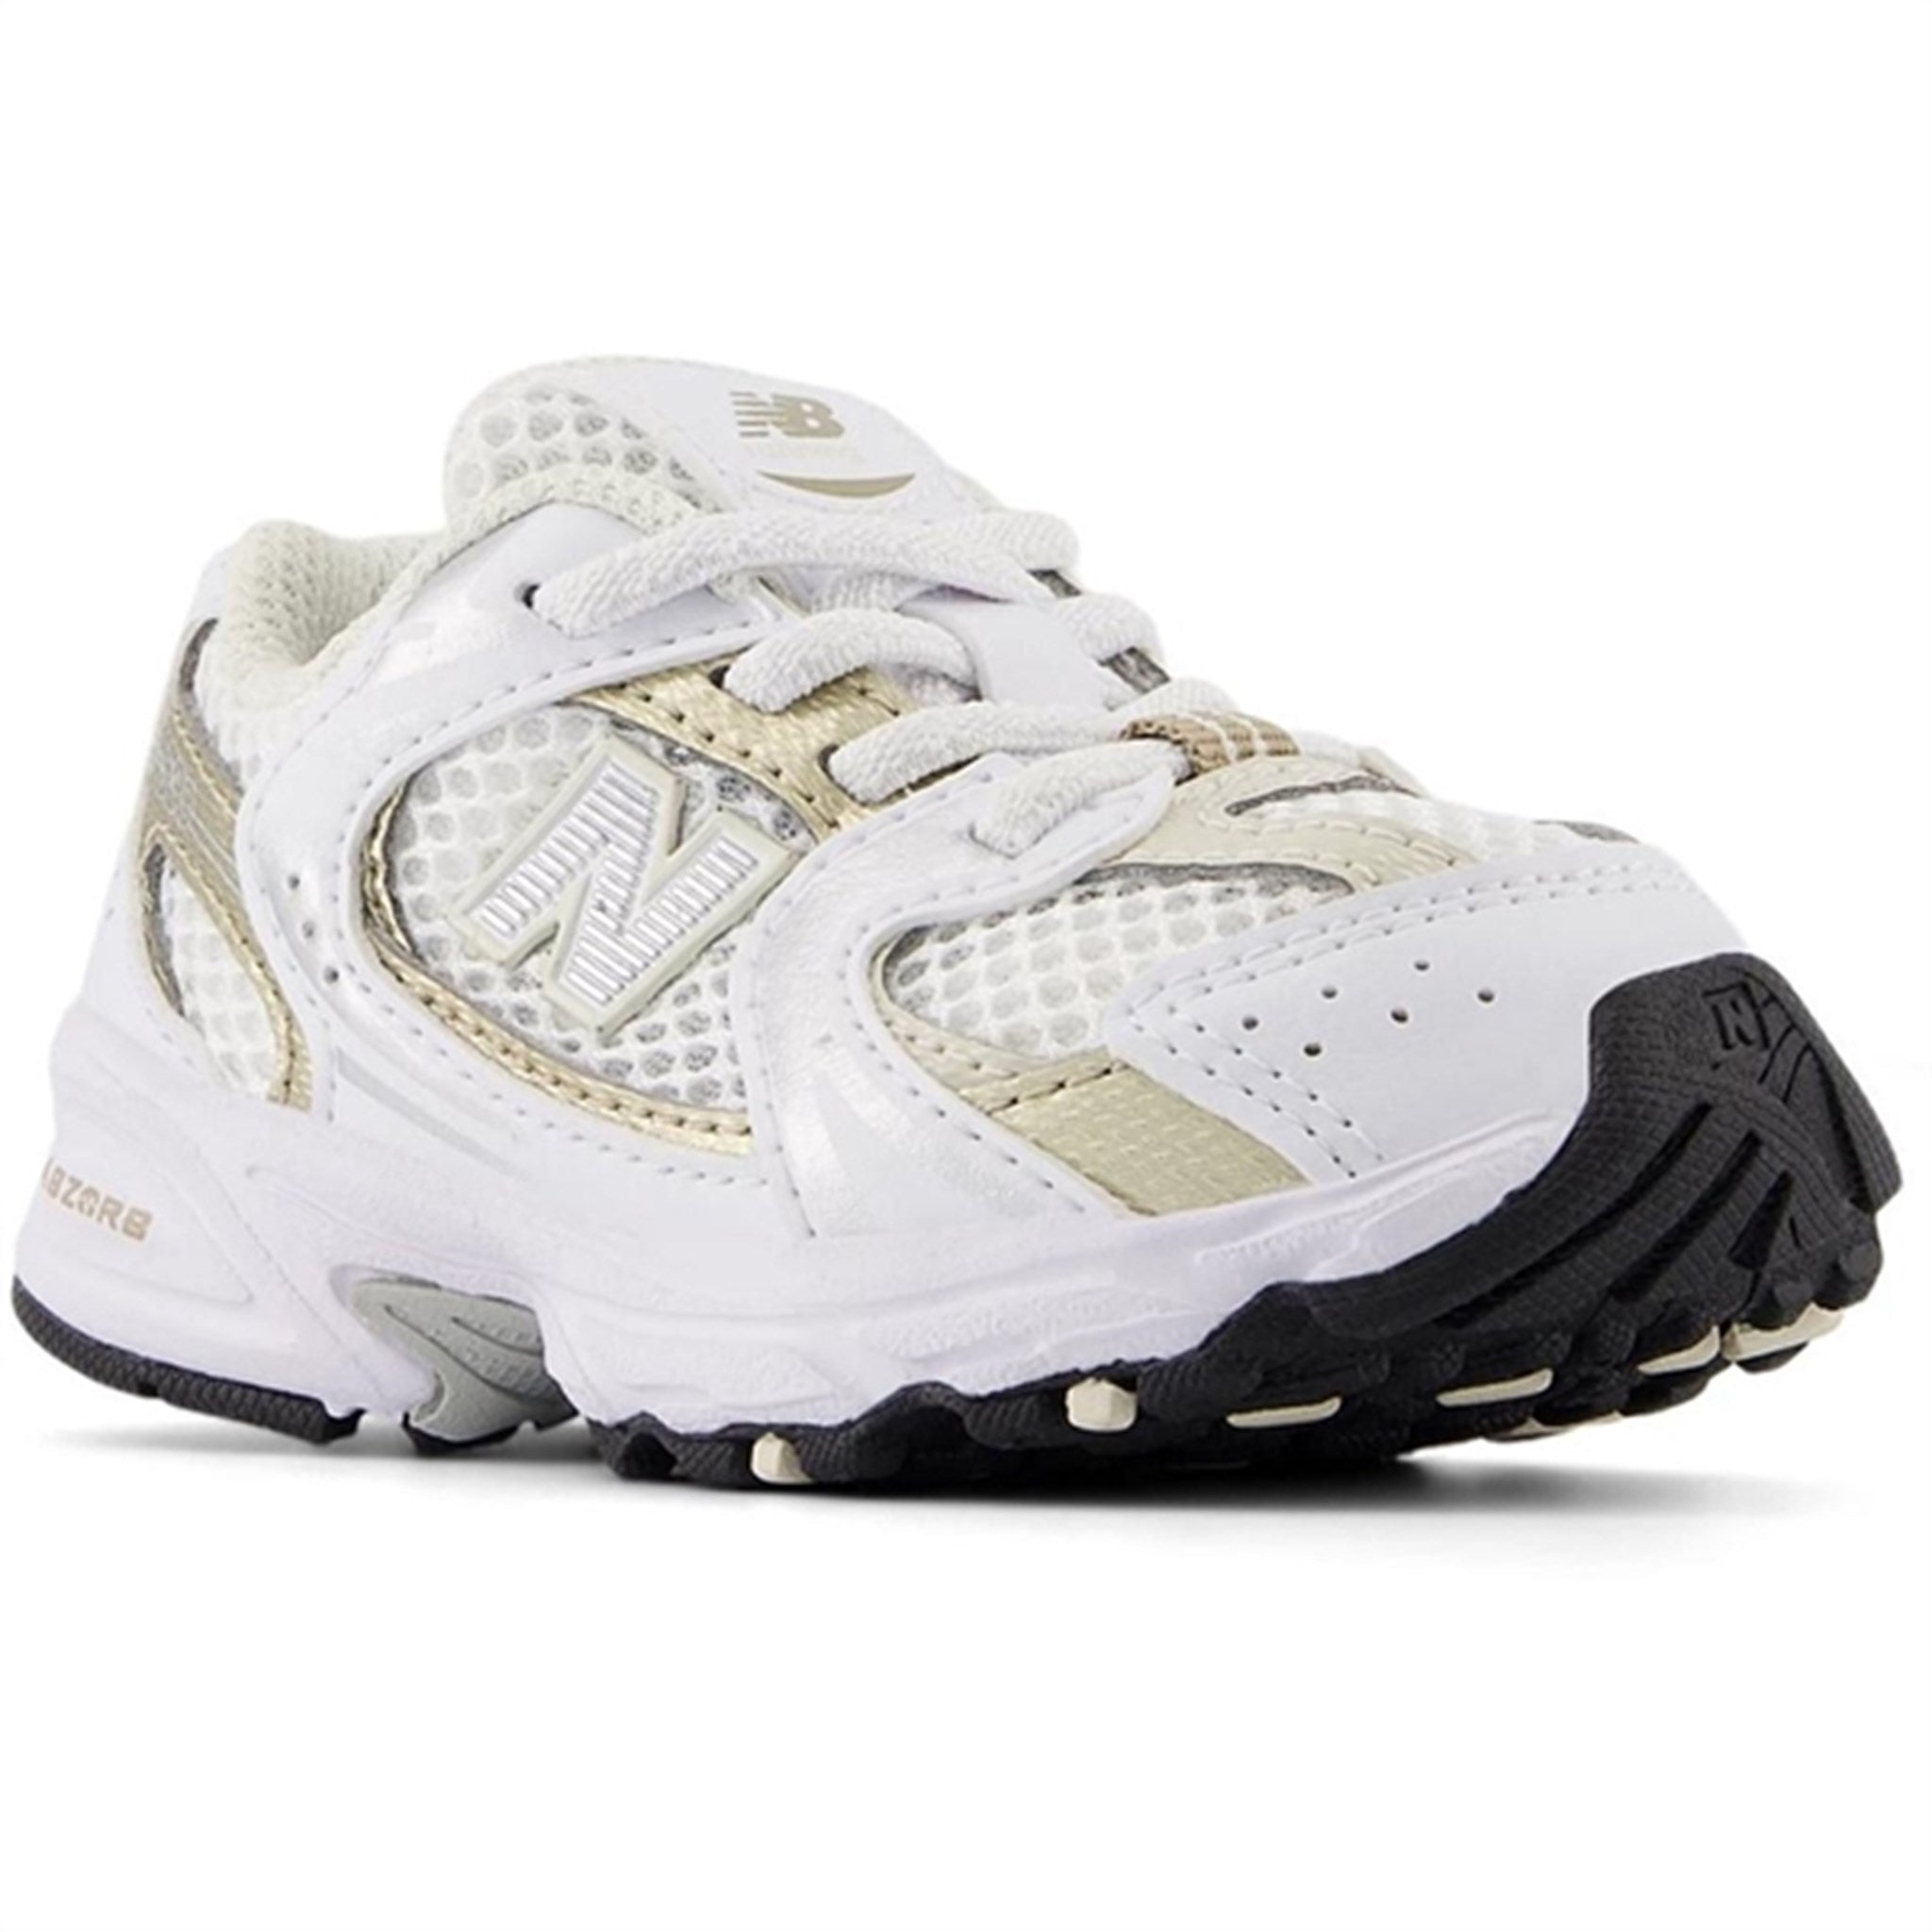 New Balance 530 Kids Bungee Lace Sneakers White 5